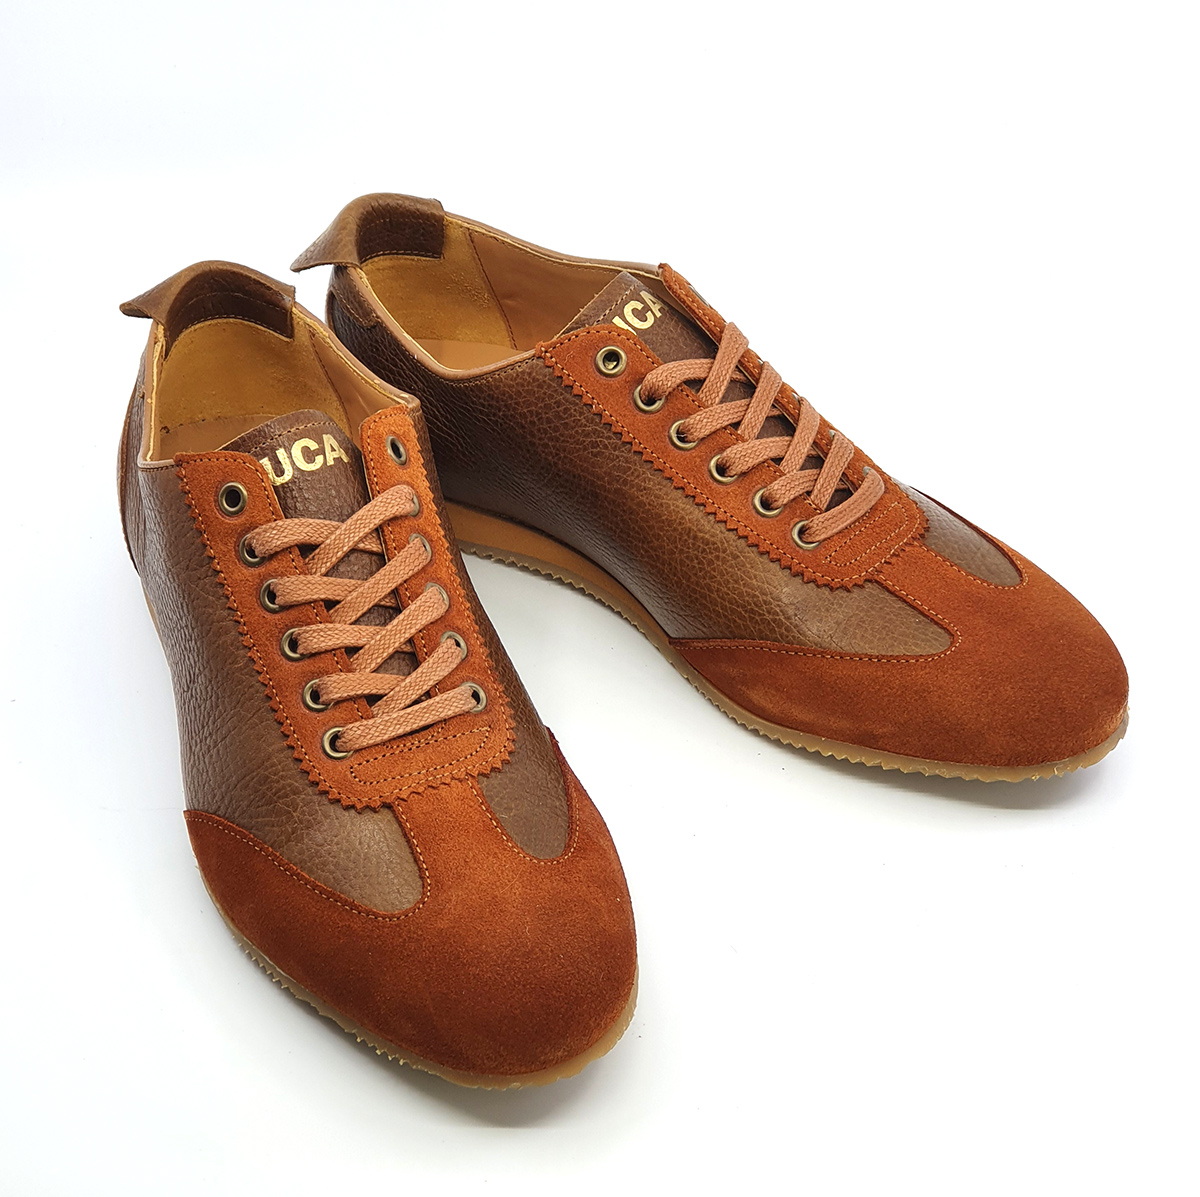 The Luca In Chestnut Leather & Suede – Old School Trainers – Mod Shoes